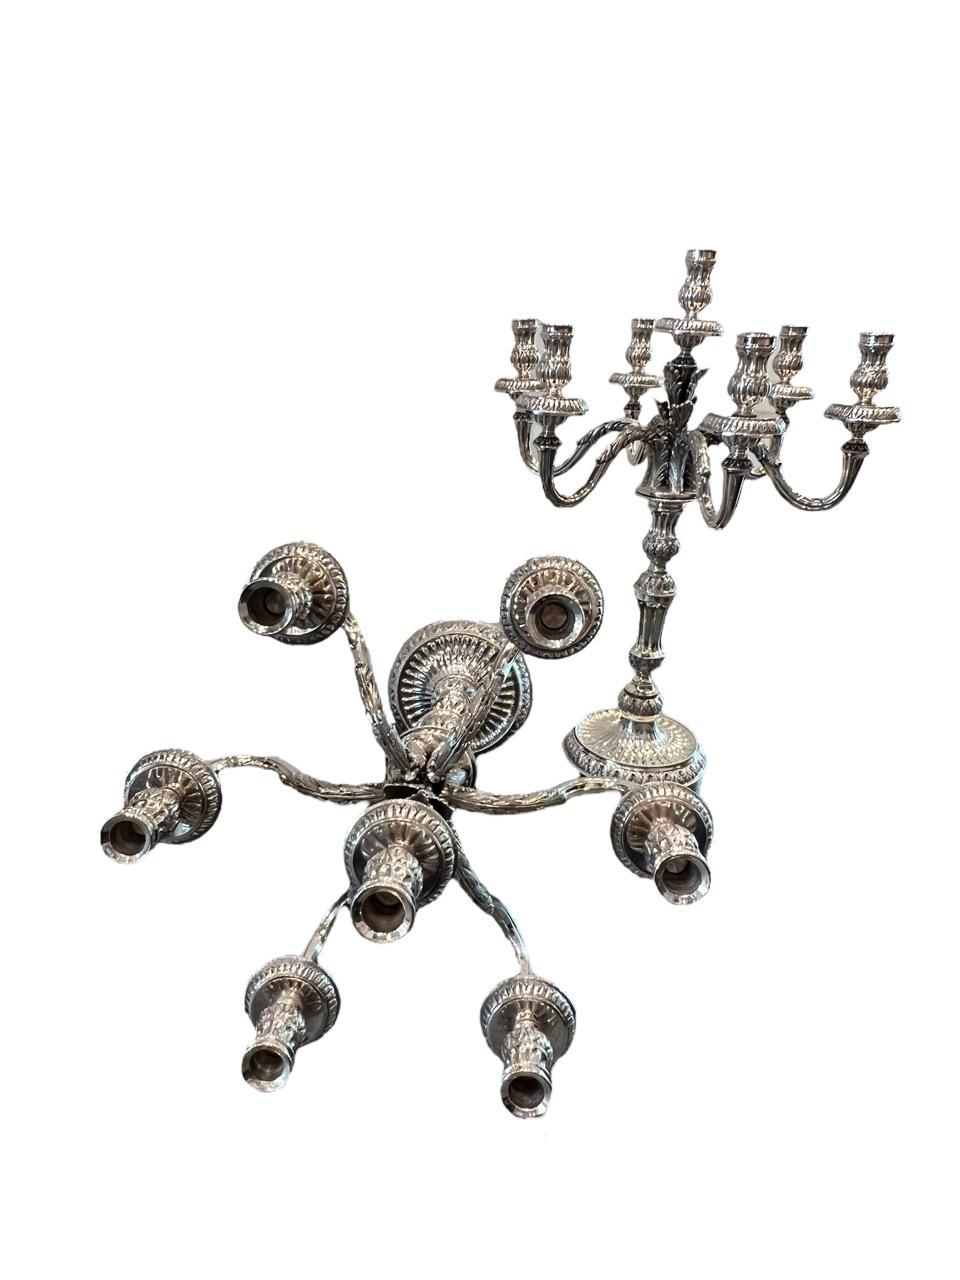 20th Century 1910 Italian Pair of Sterling Silver Candelabras, Tall and Heavy For Sale